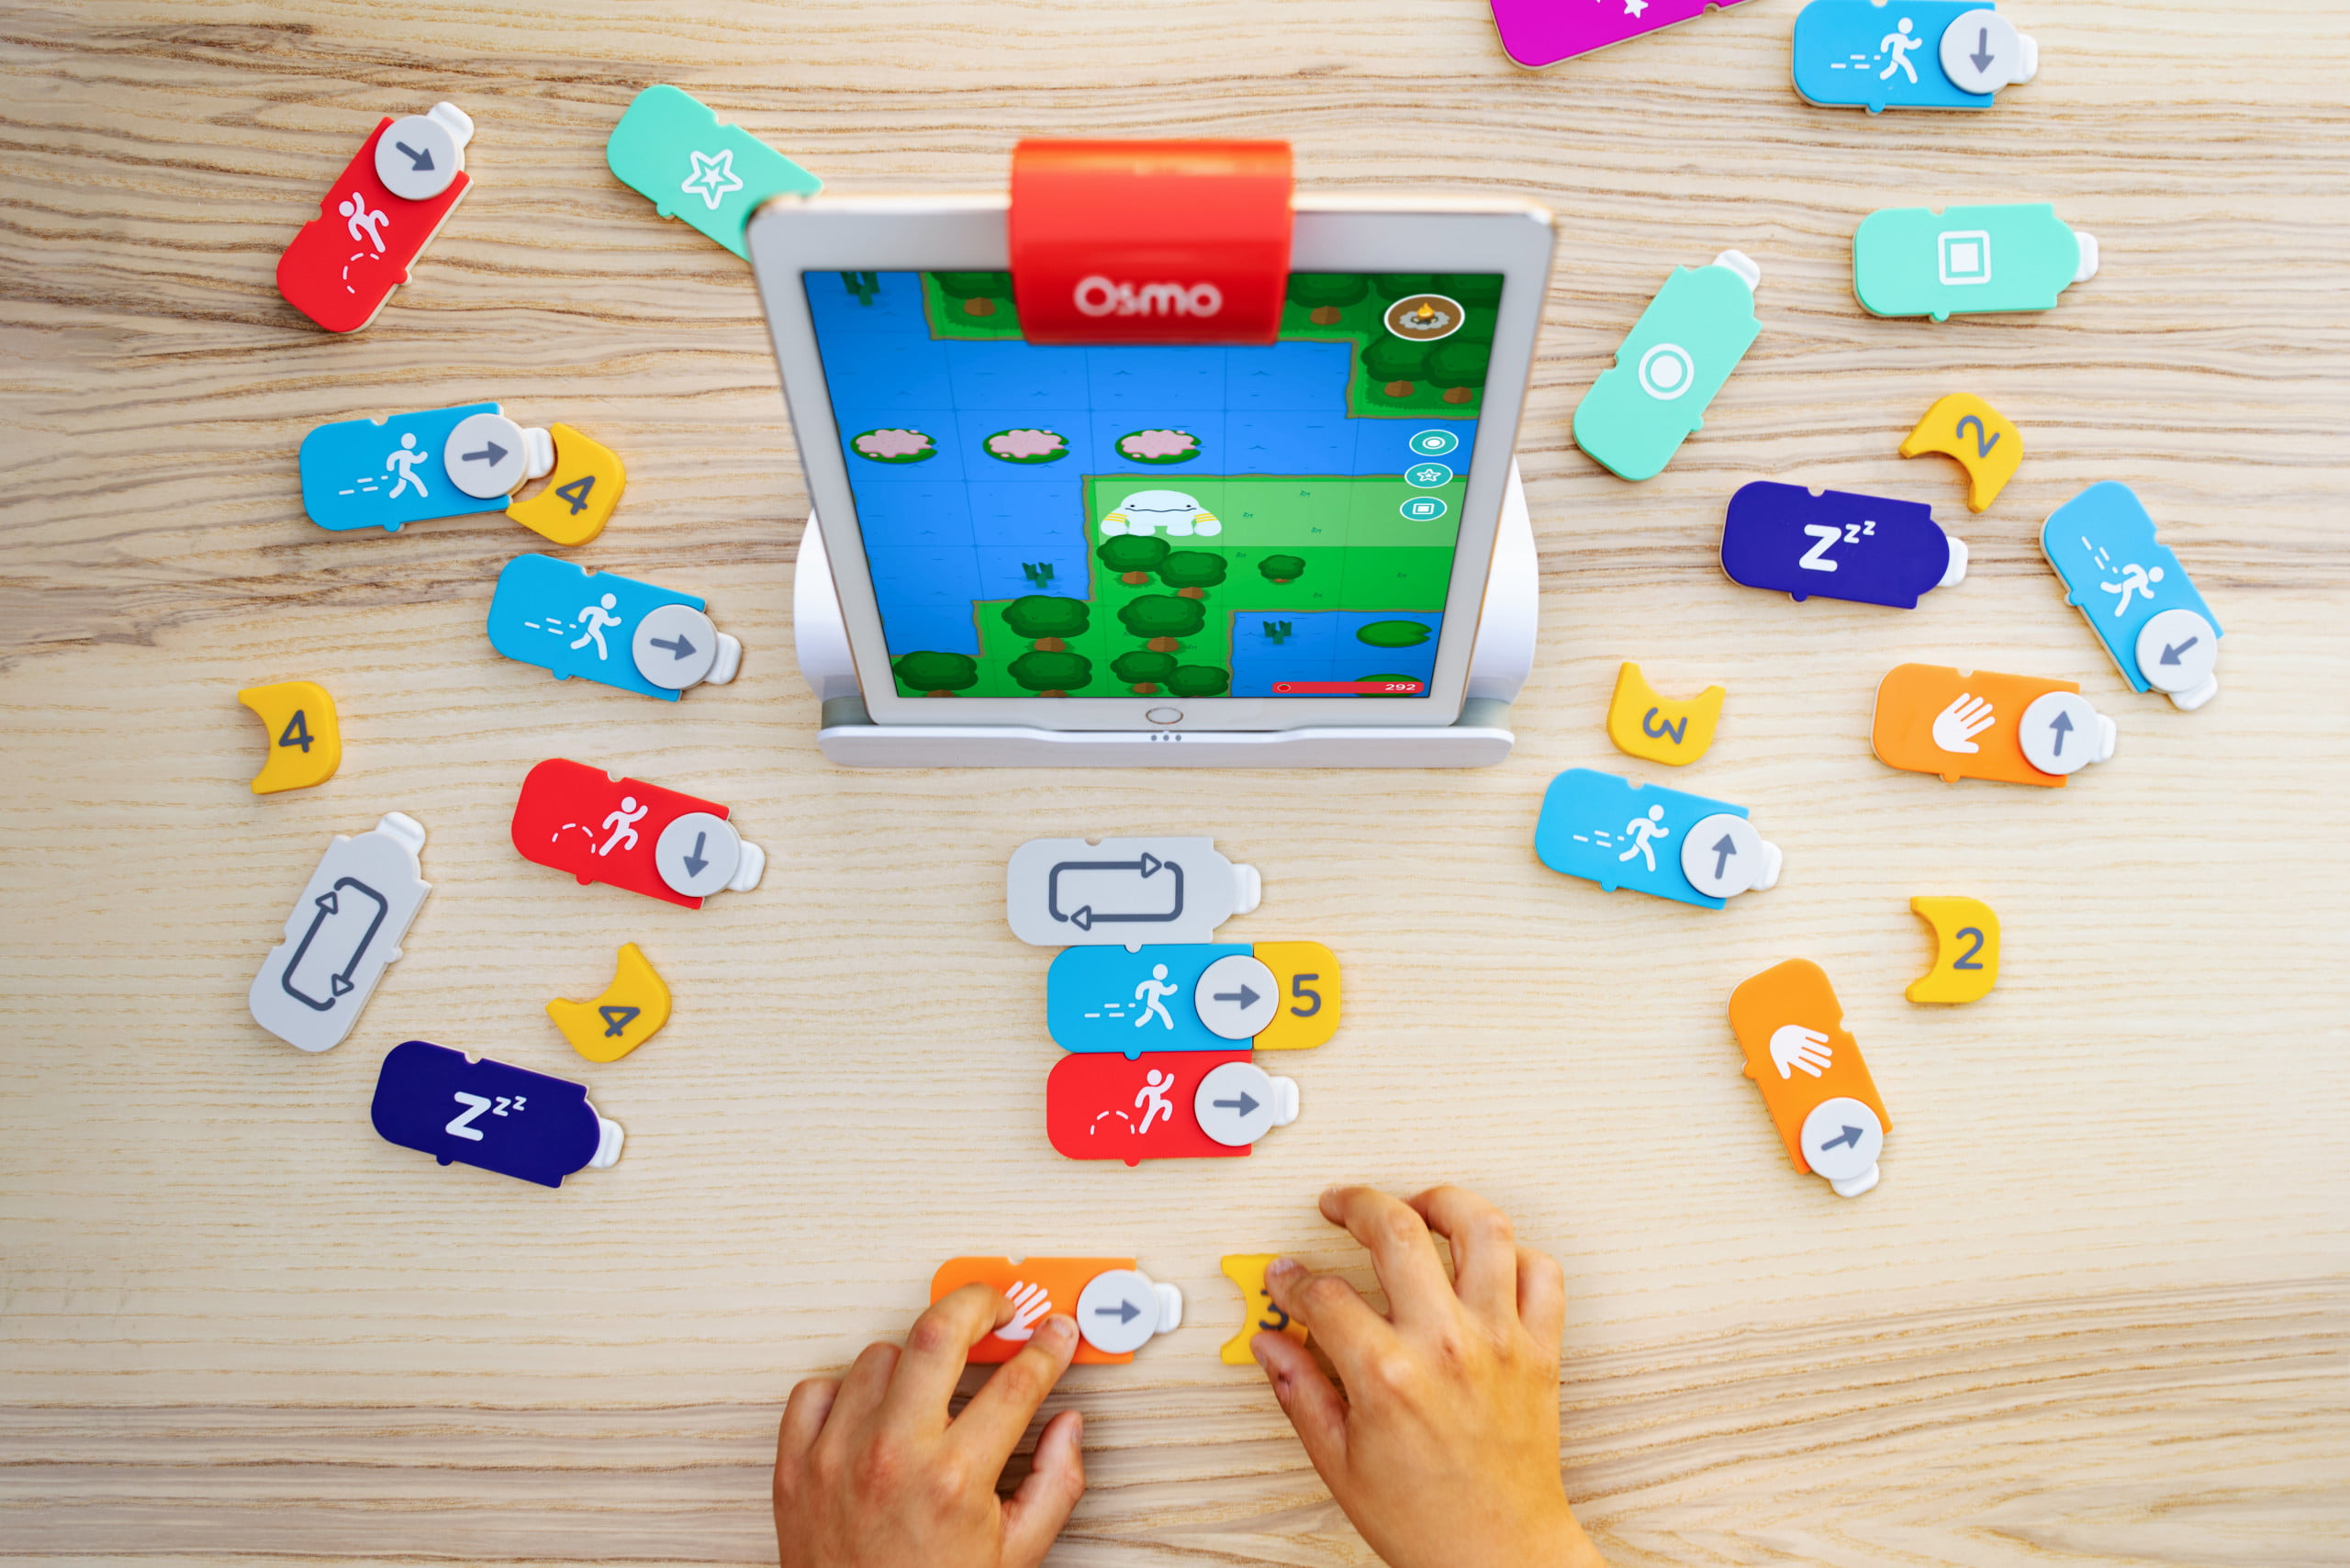 A kid making a program with Osmo coding blocks